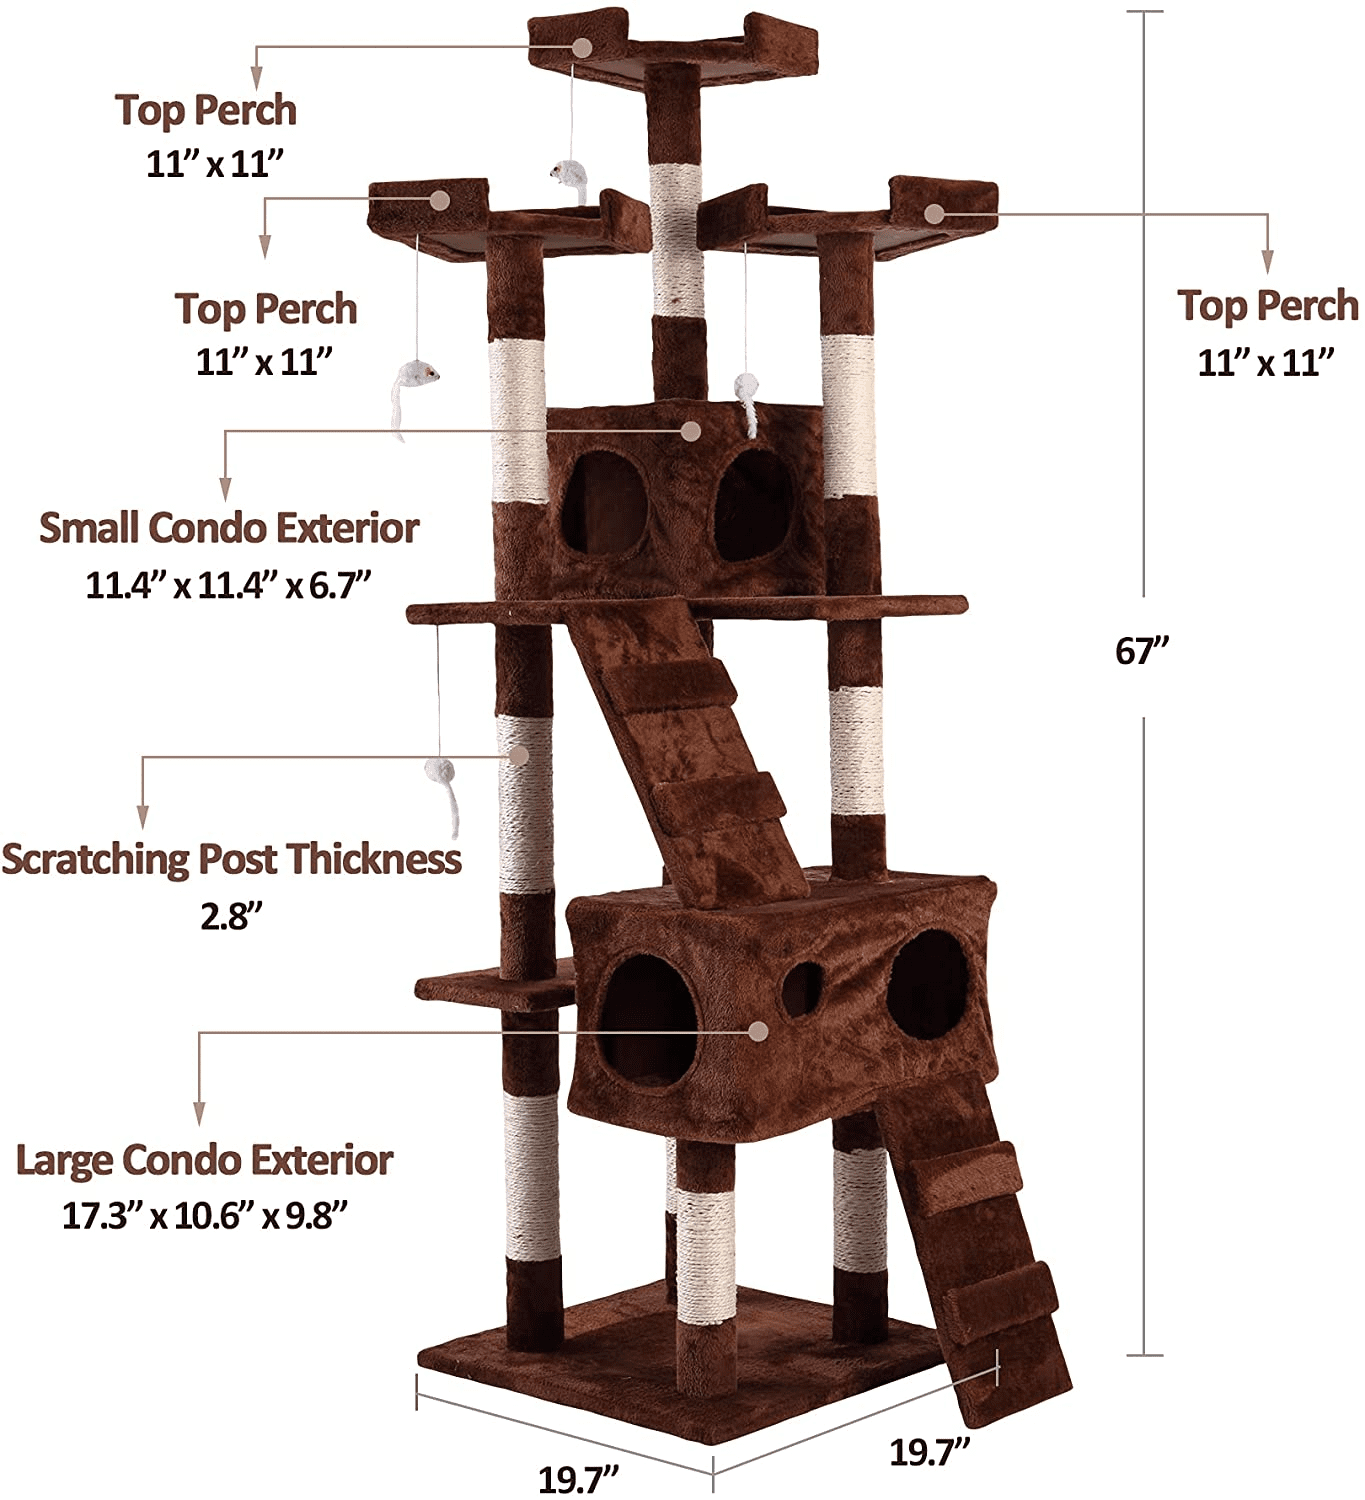 Jaxpety 67-in Cat Tree and Condo Scratching Post Tower， Brown